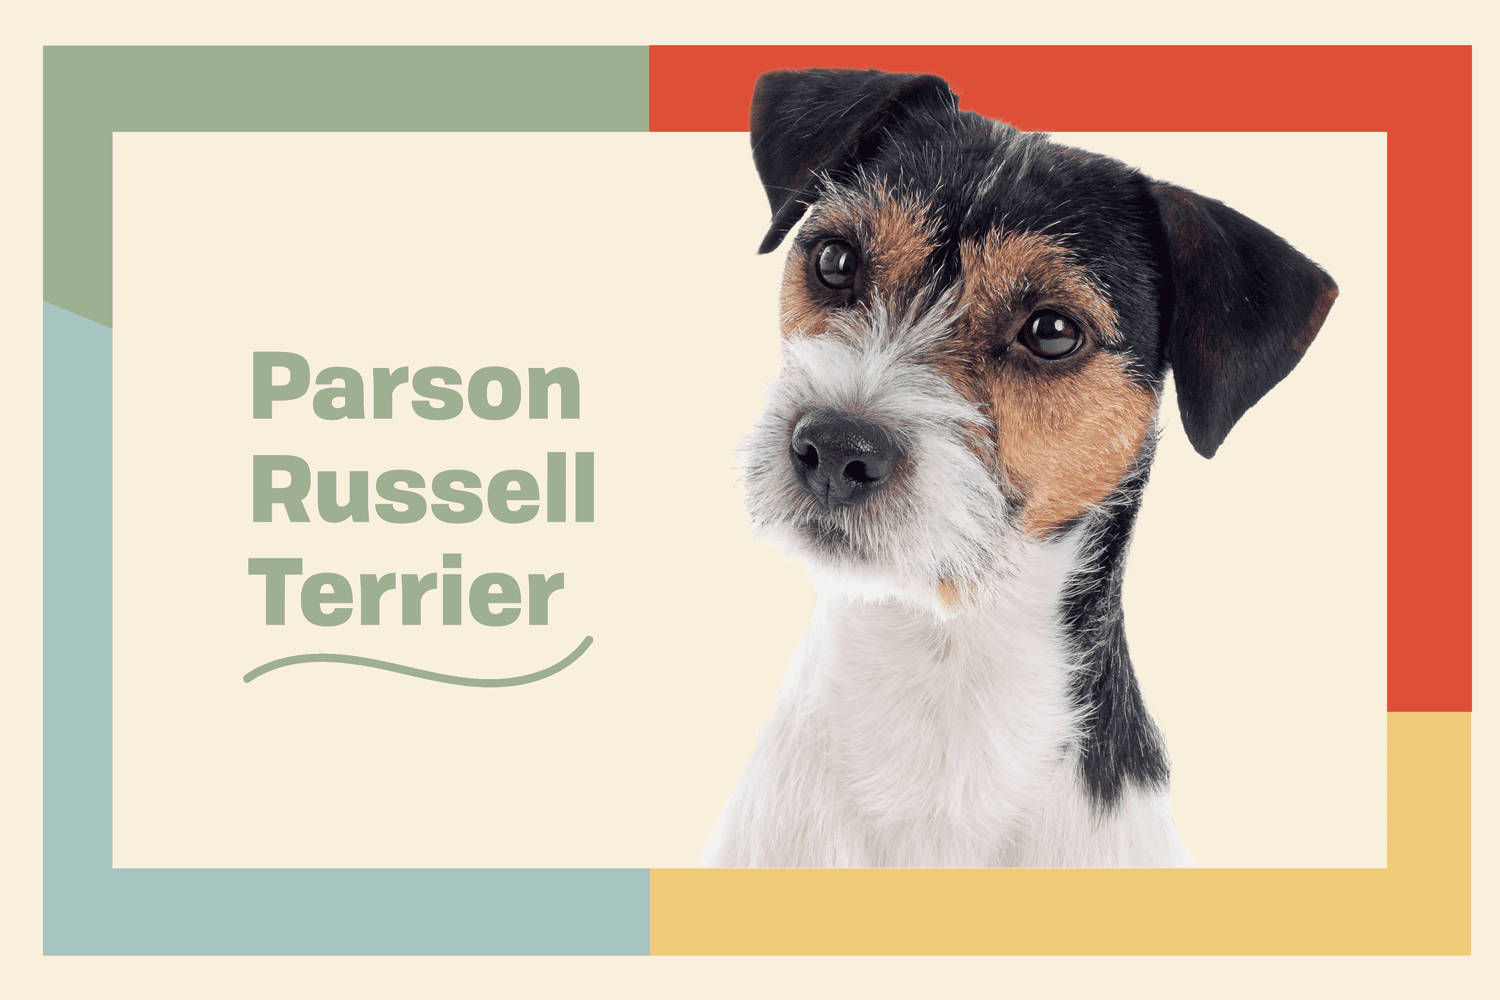 Parson Russell Terrier (Jack Terrier) Dog Breed Information and Characteristics | Daily Paws